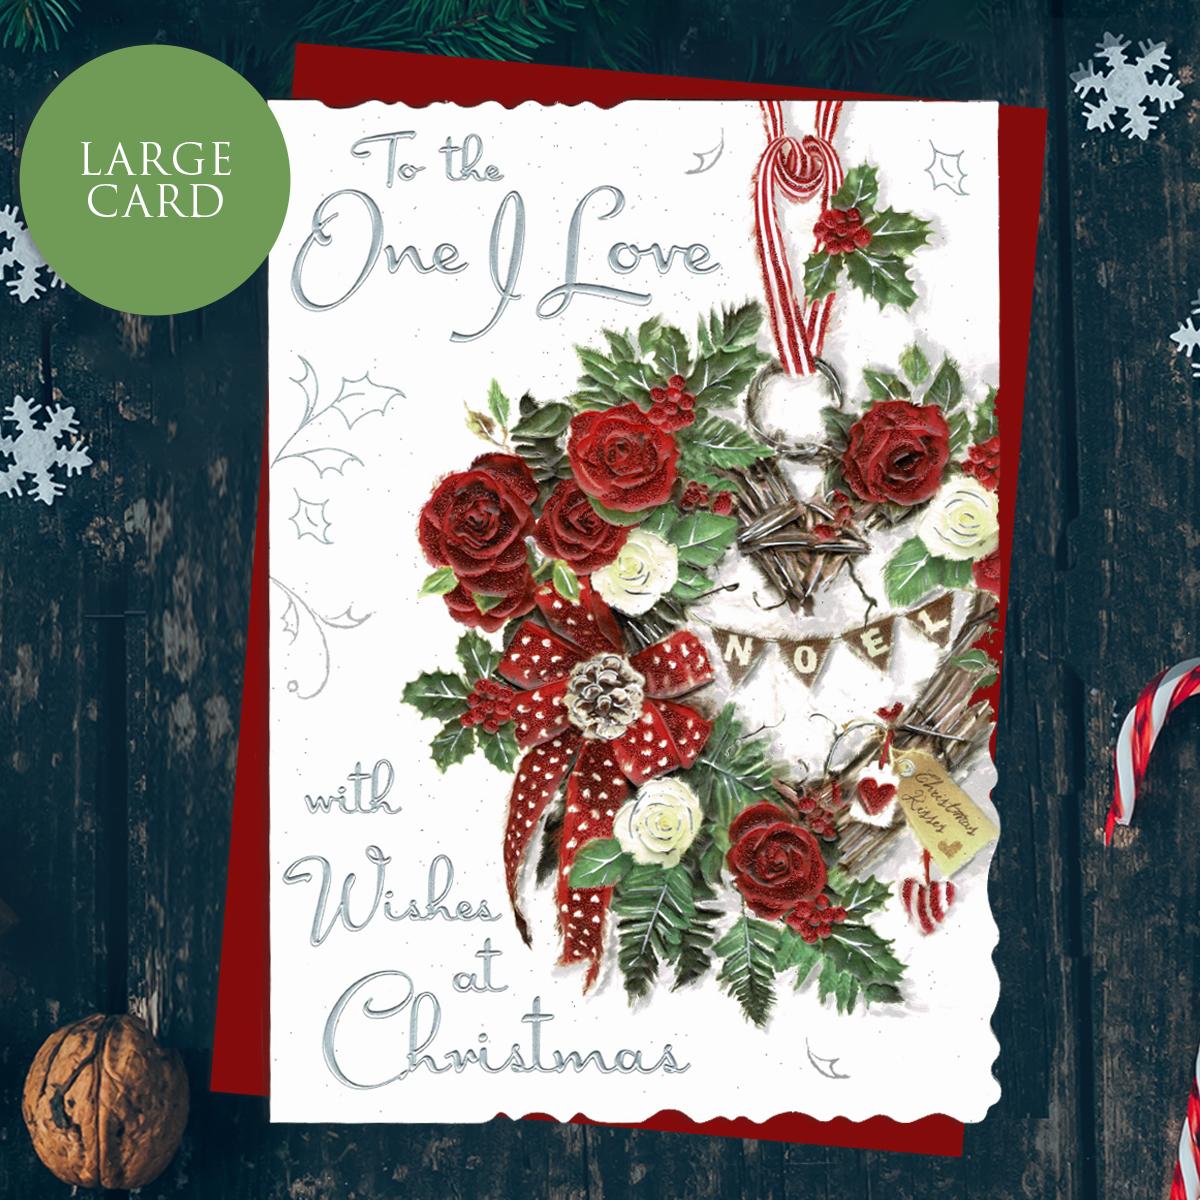 To The One I Love With Wishes At Christmas. This Large Card Is Finished With Silver Foil lettering, Red Glitter, Red Envelope And Colour Printed Insert